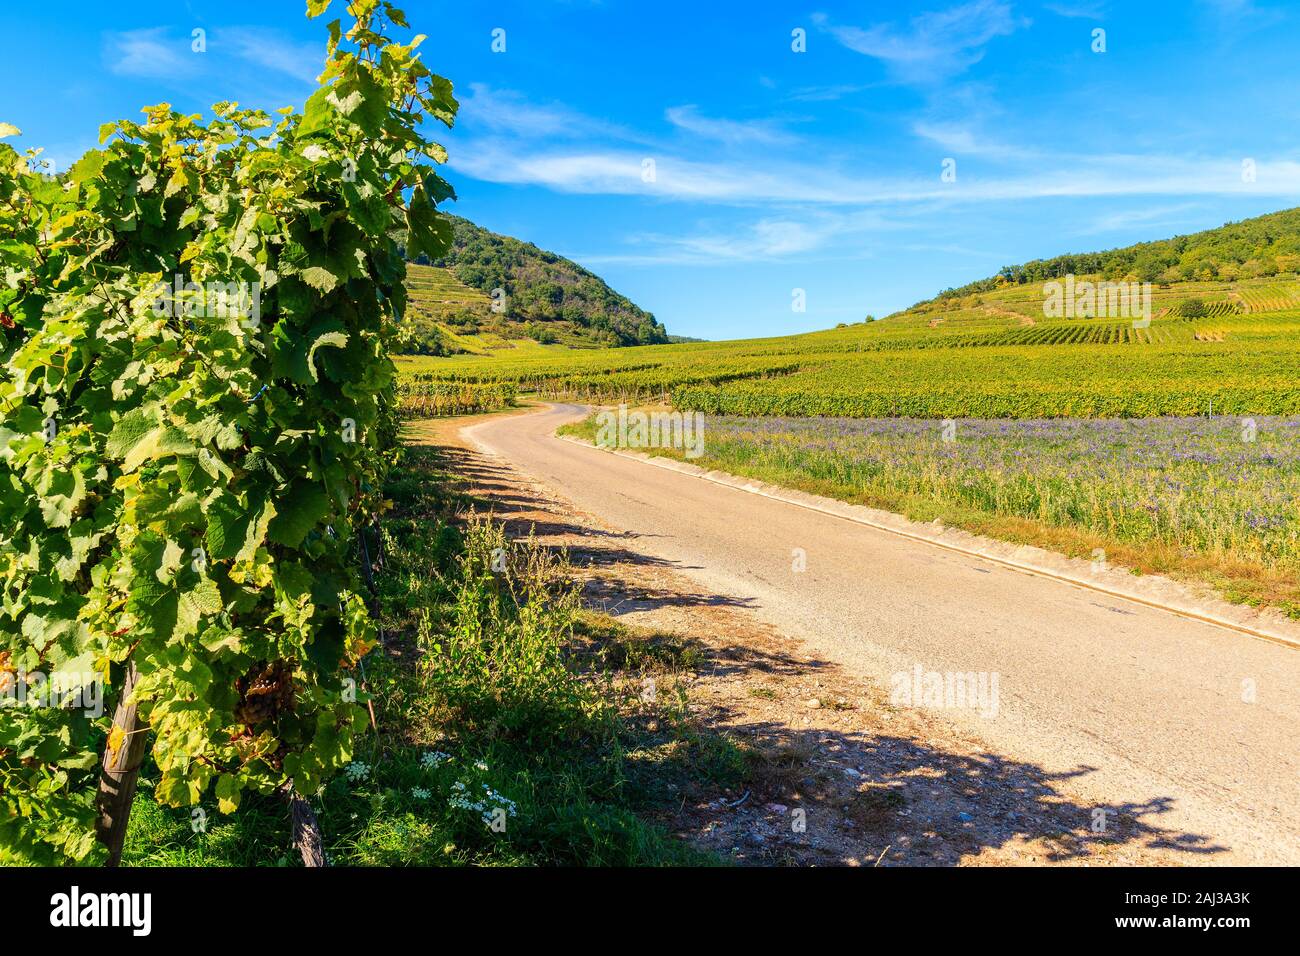 Rural road among vineyards on hills near Riquewihr village on sunny beautiful day, Alsace Wine Route, France Stock Photo